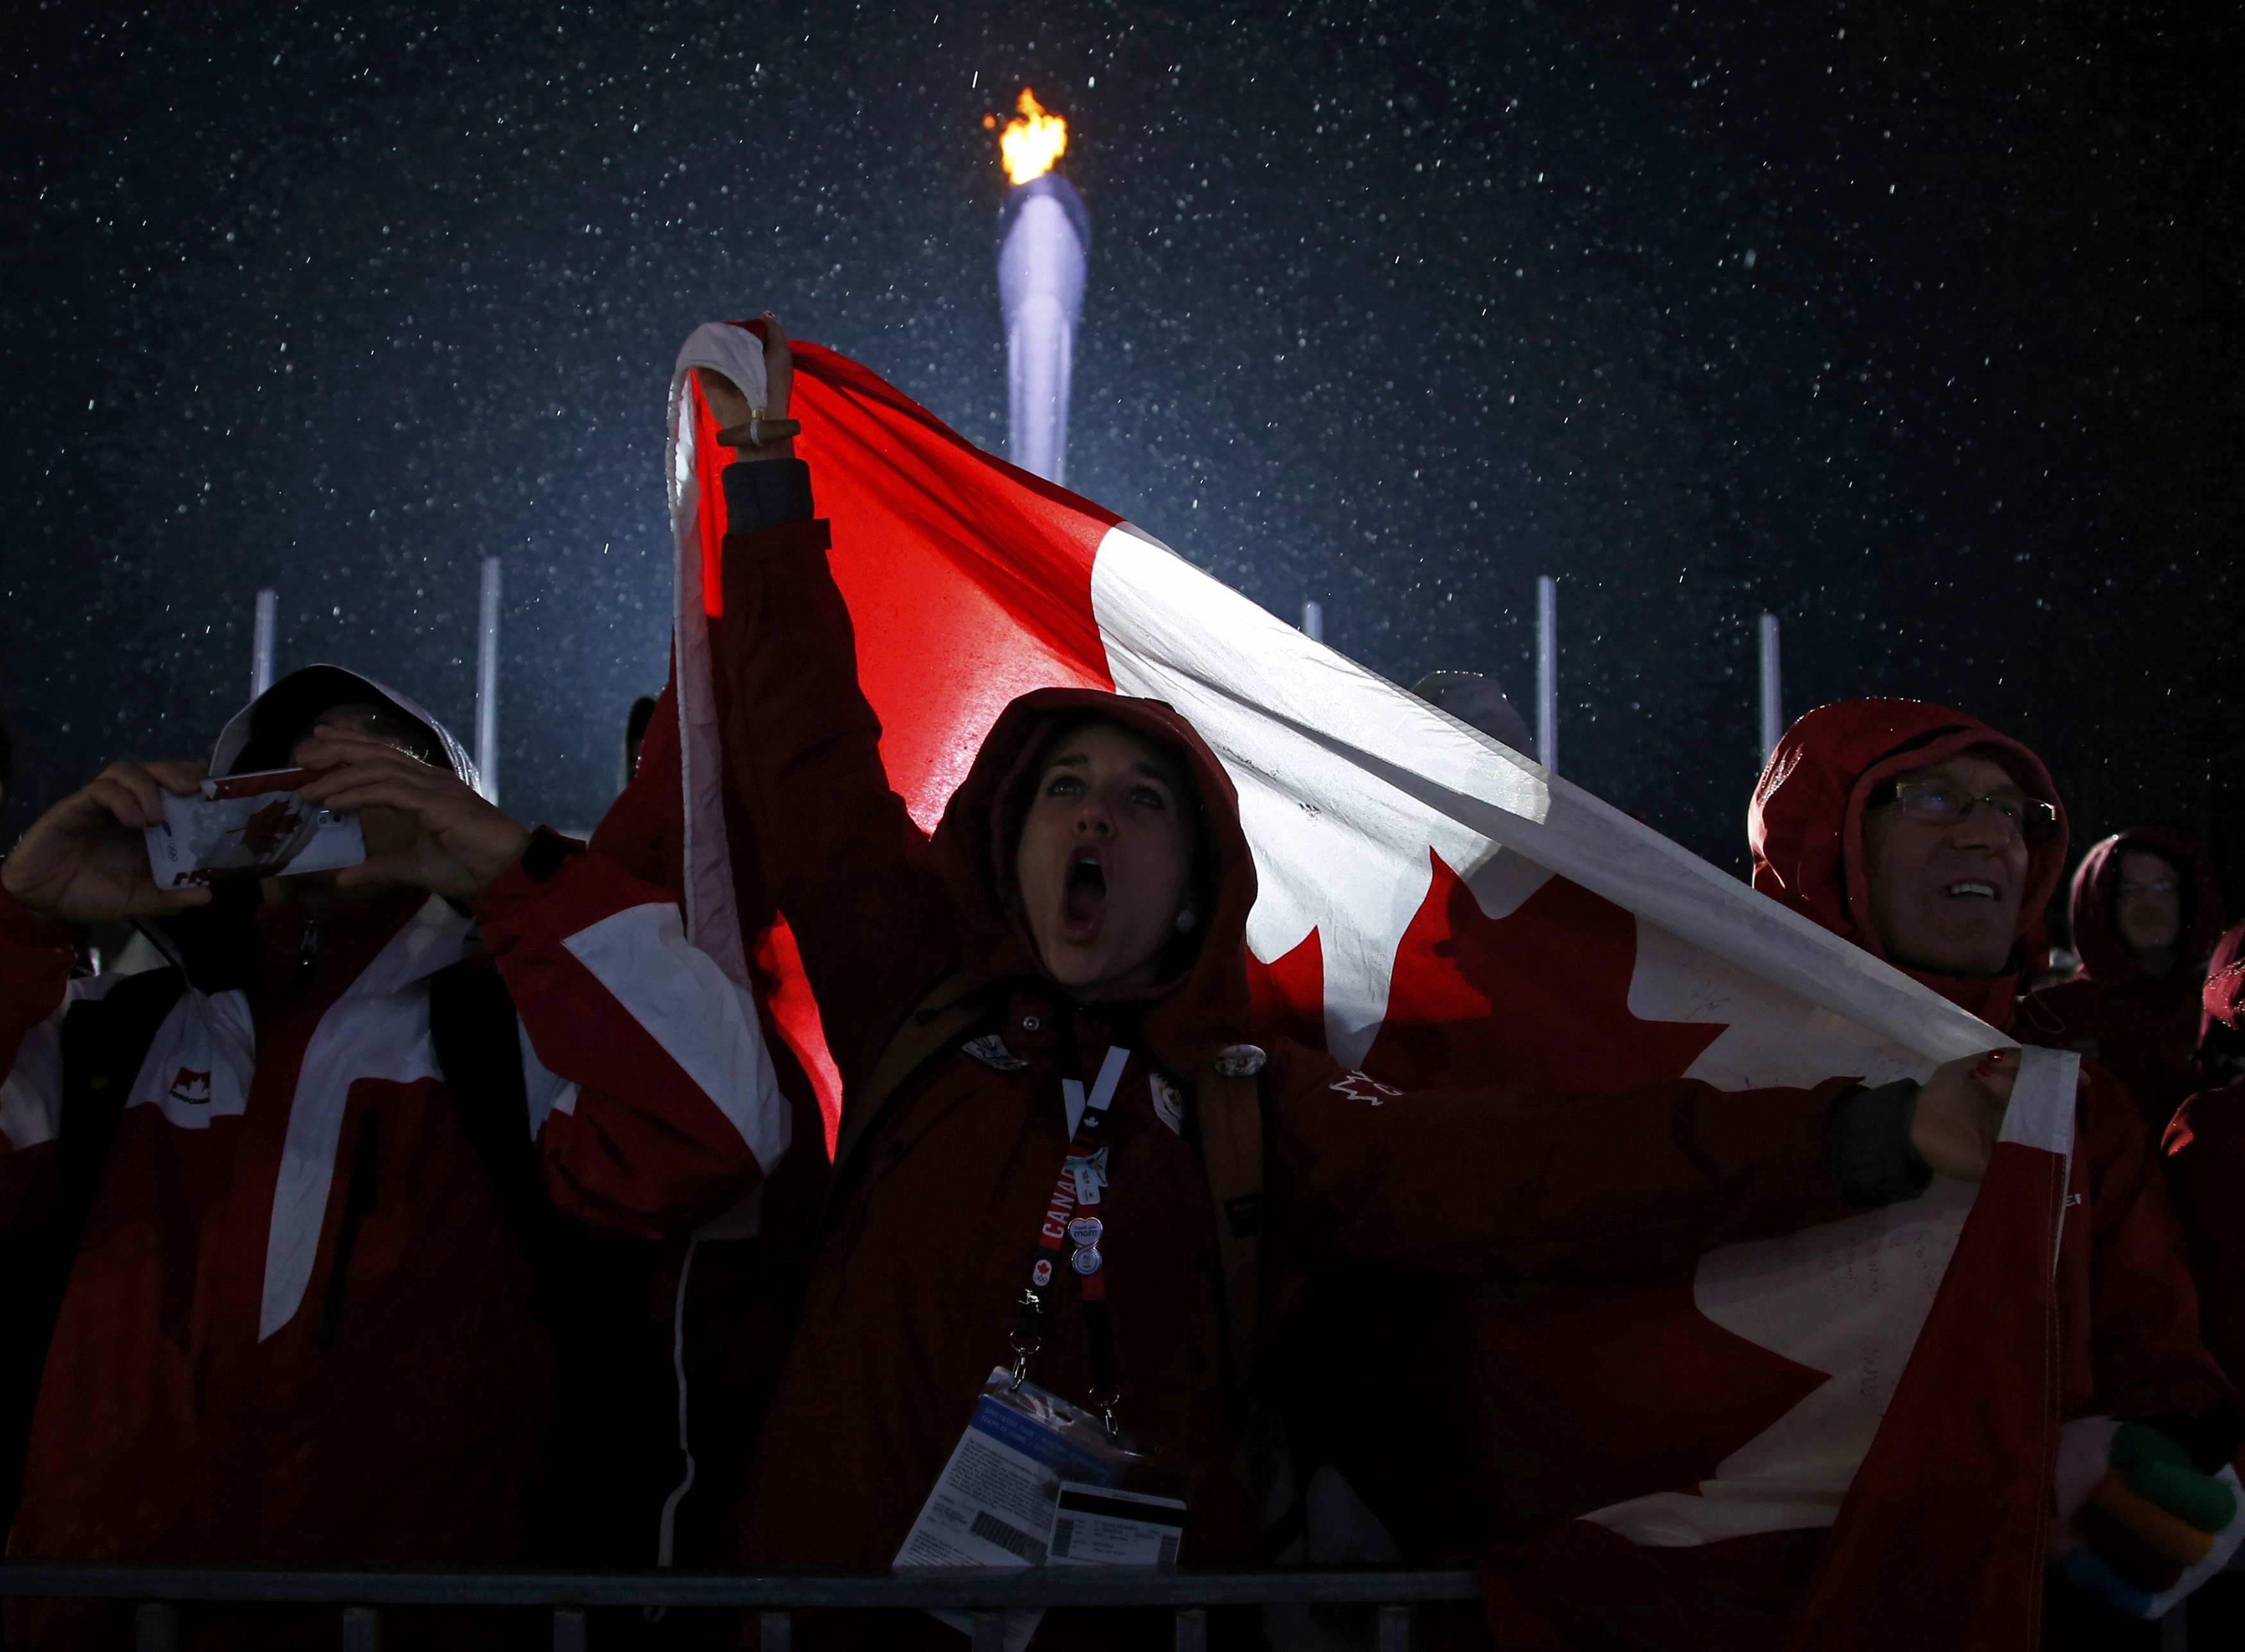 Canadian fans cheer during the medal ceremony.